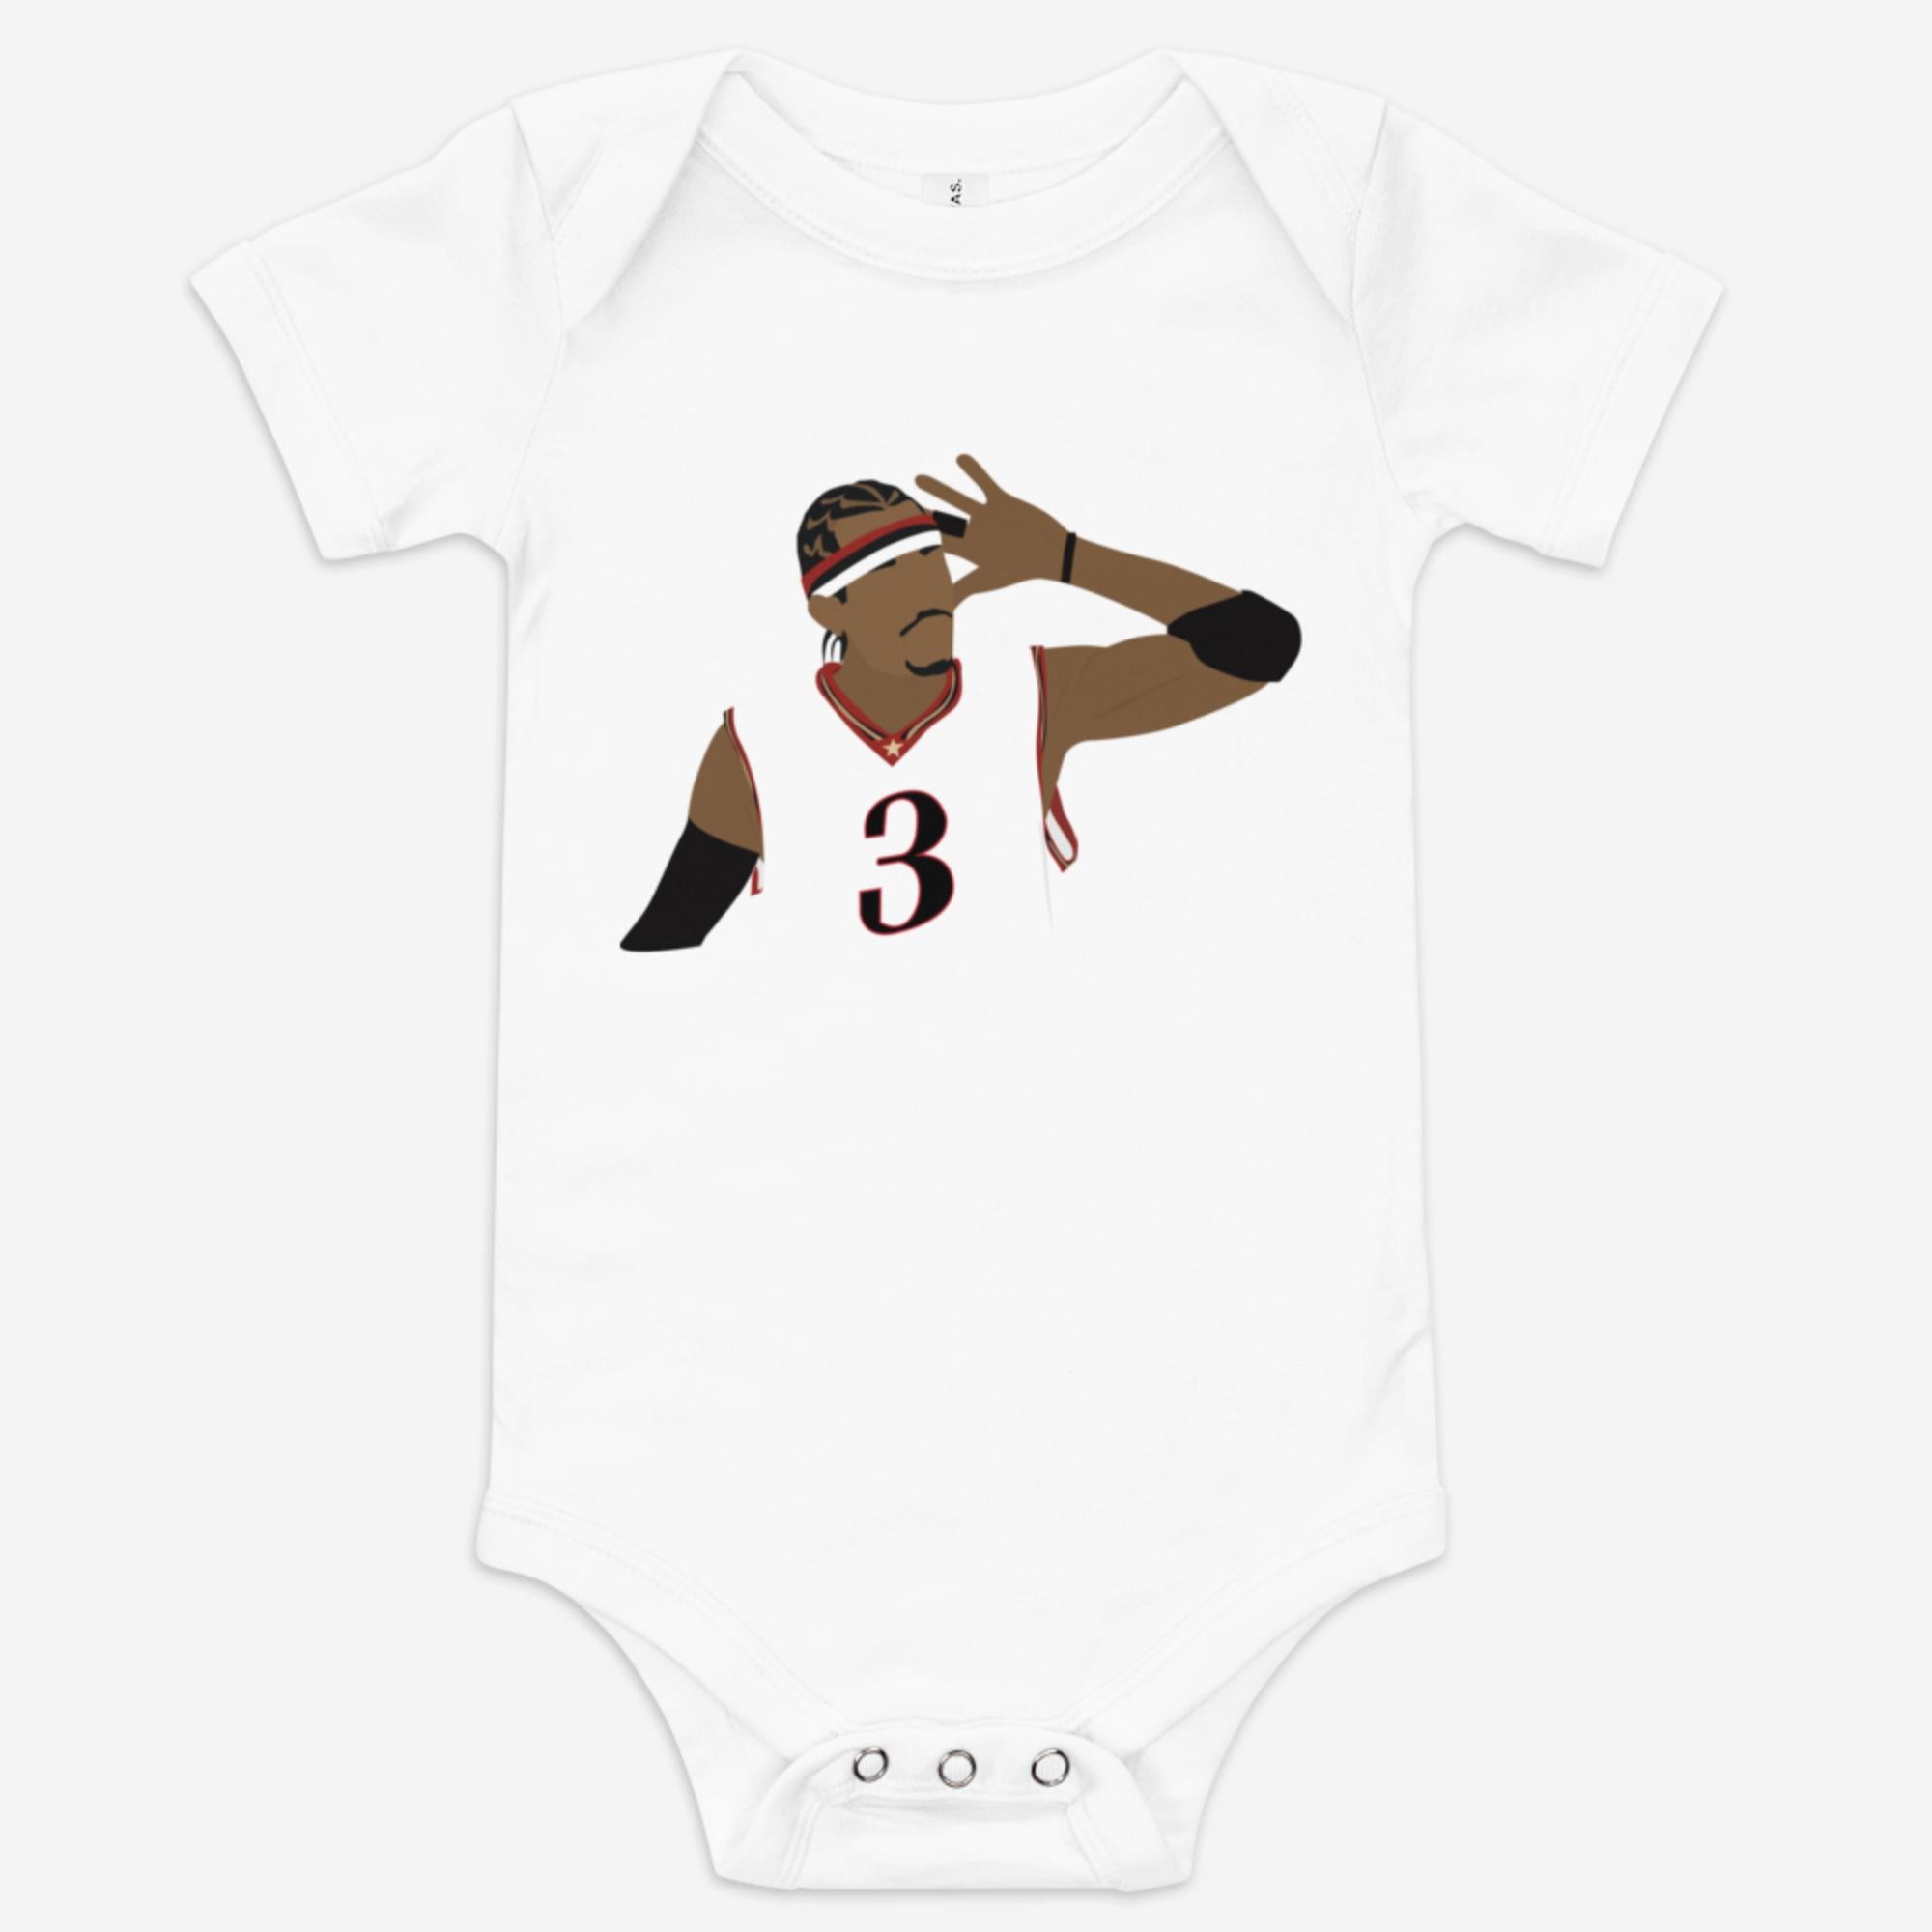 "The Answer" Baby Onesie